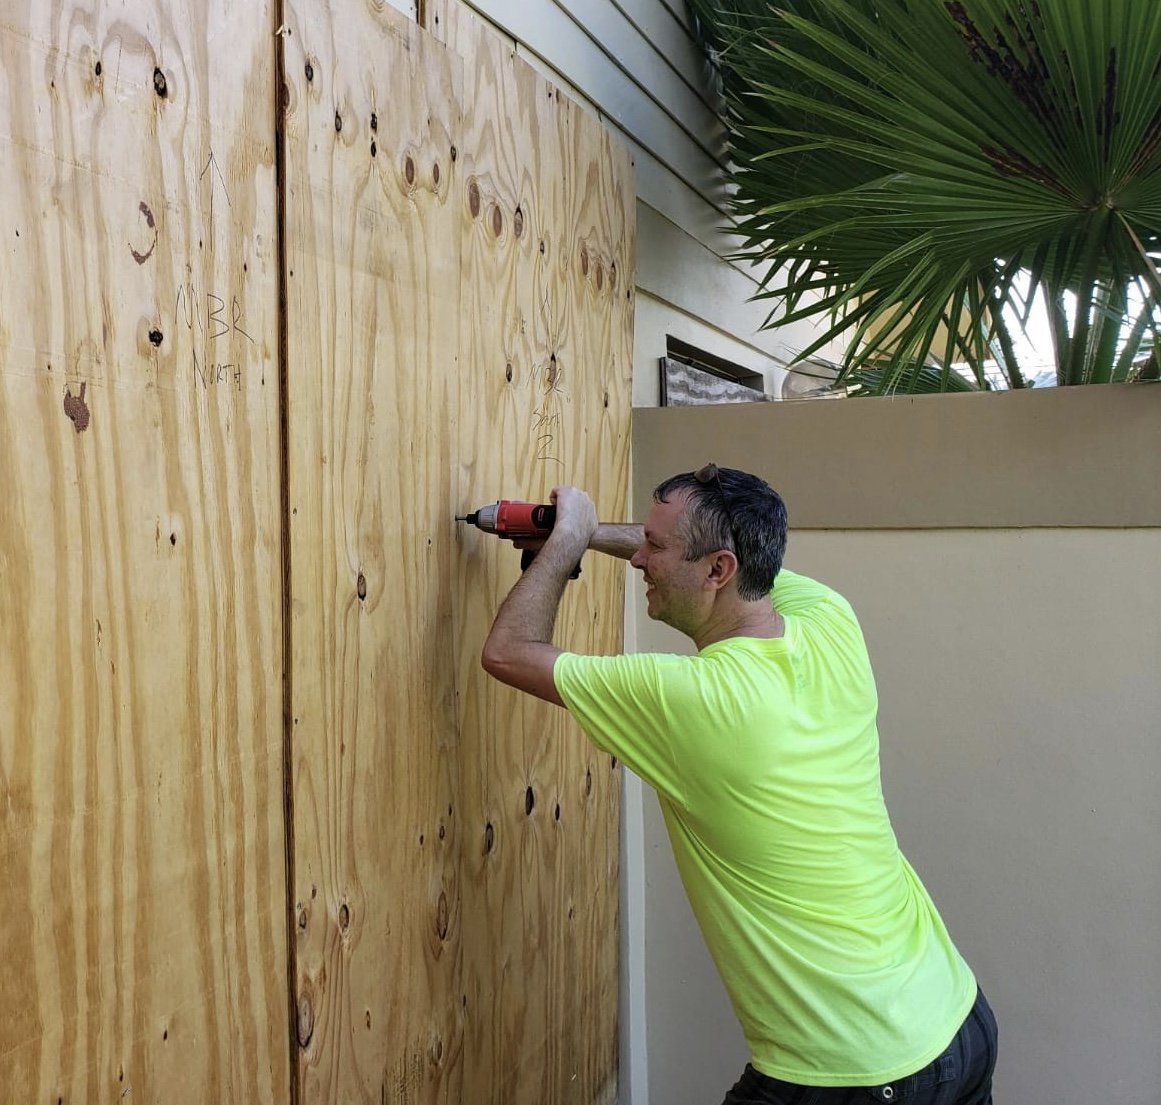 This guy's really putting his back into it, making sure he's ready for the storms. Thankfully, we're almost though Hurricane season here in South Florida. 🌀 #powerbuilt #powerbuilttools #drill #hurricaneseason #hurricaneprep #preparing #tools #powertools #cordlessdrill #plywood